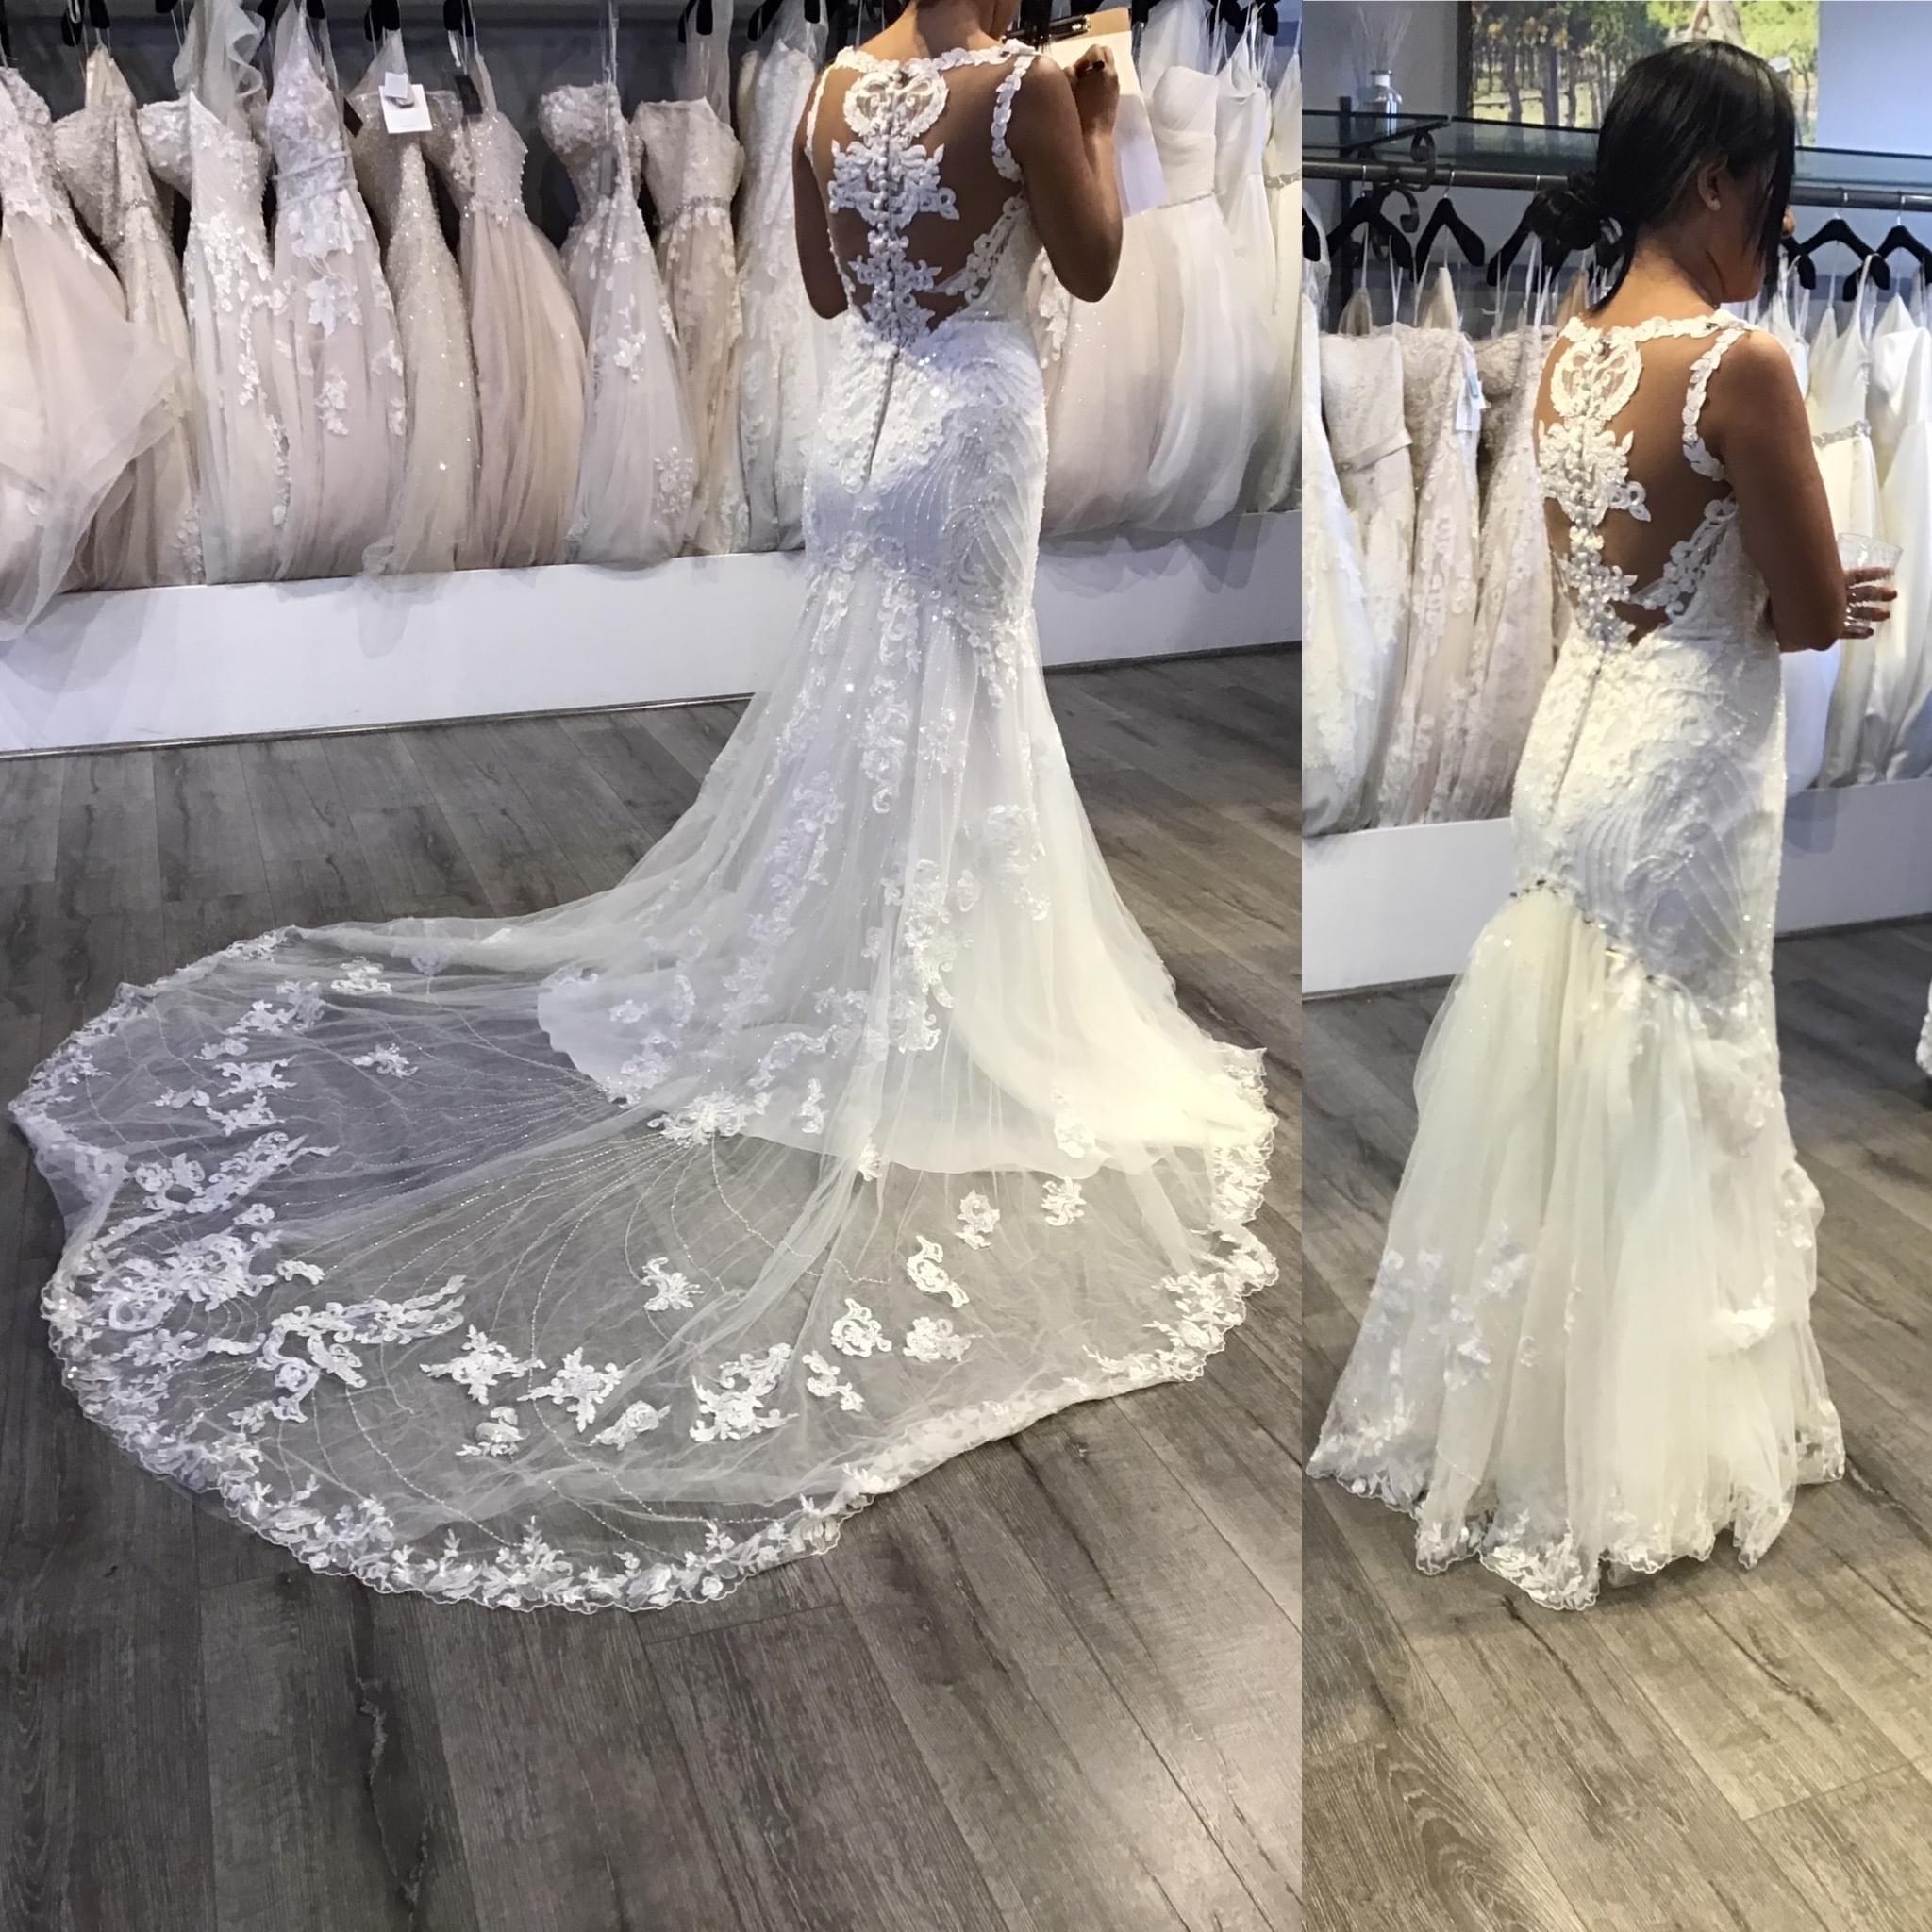 Tyla's Bride, a bridal shop with amazing affordable wedding gowns ready to try on. Book your fitting today and find your perfect dress.